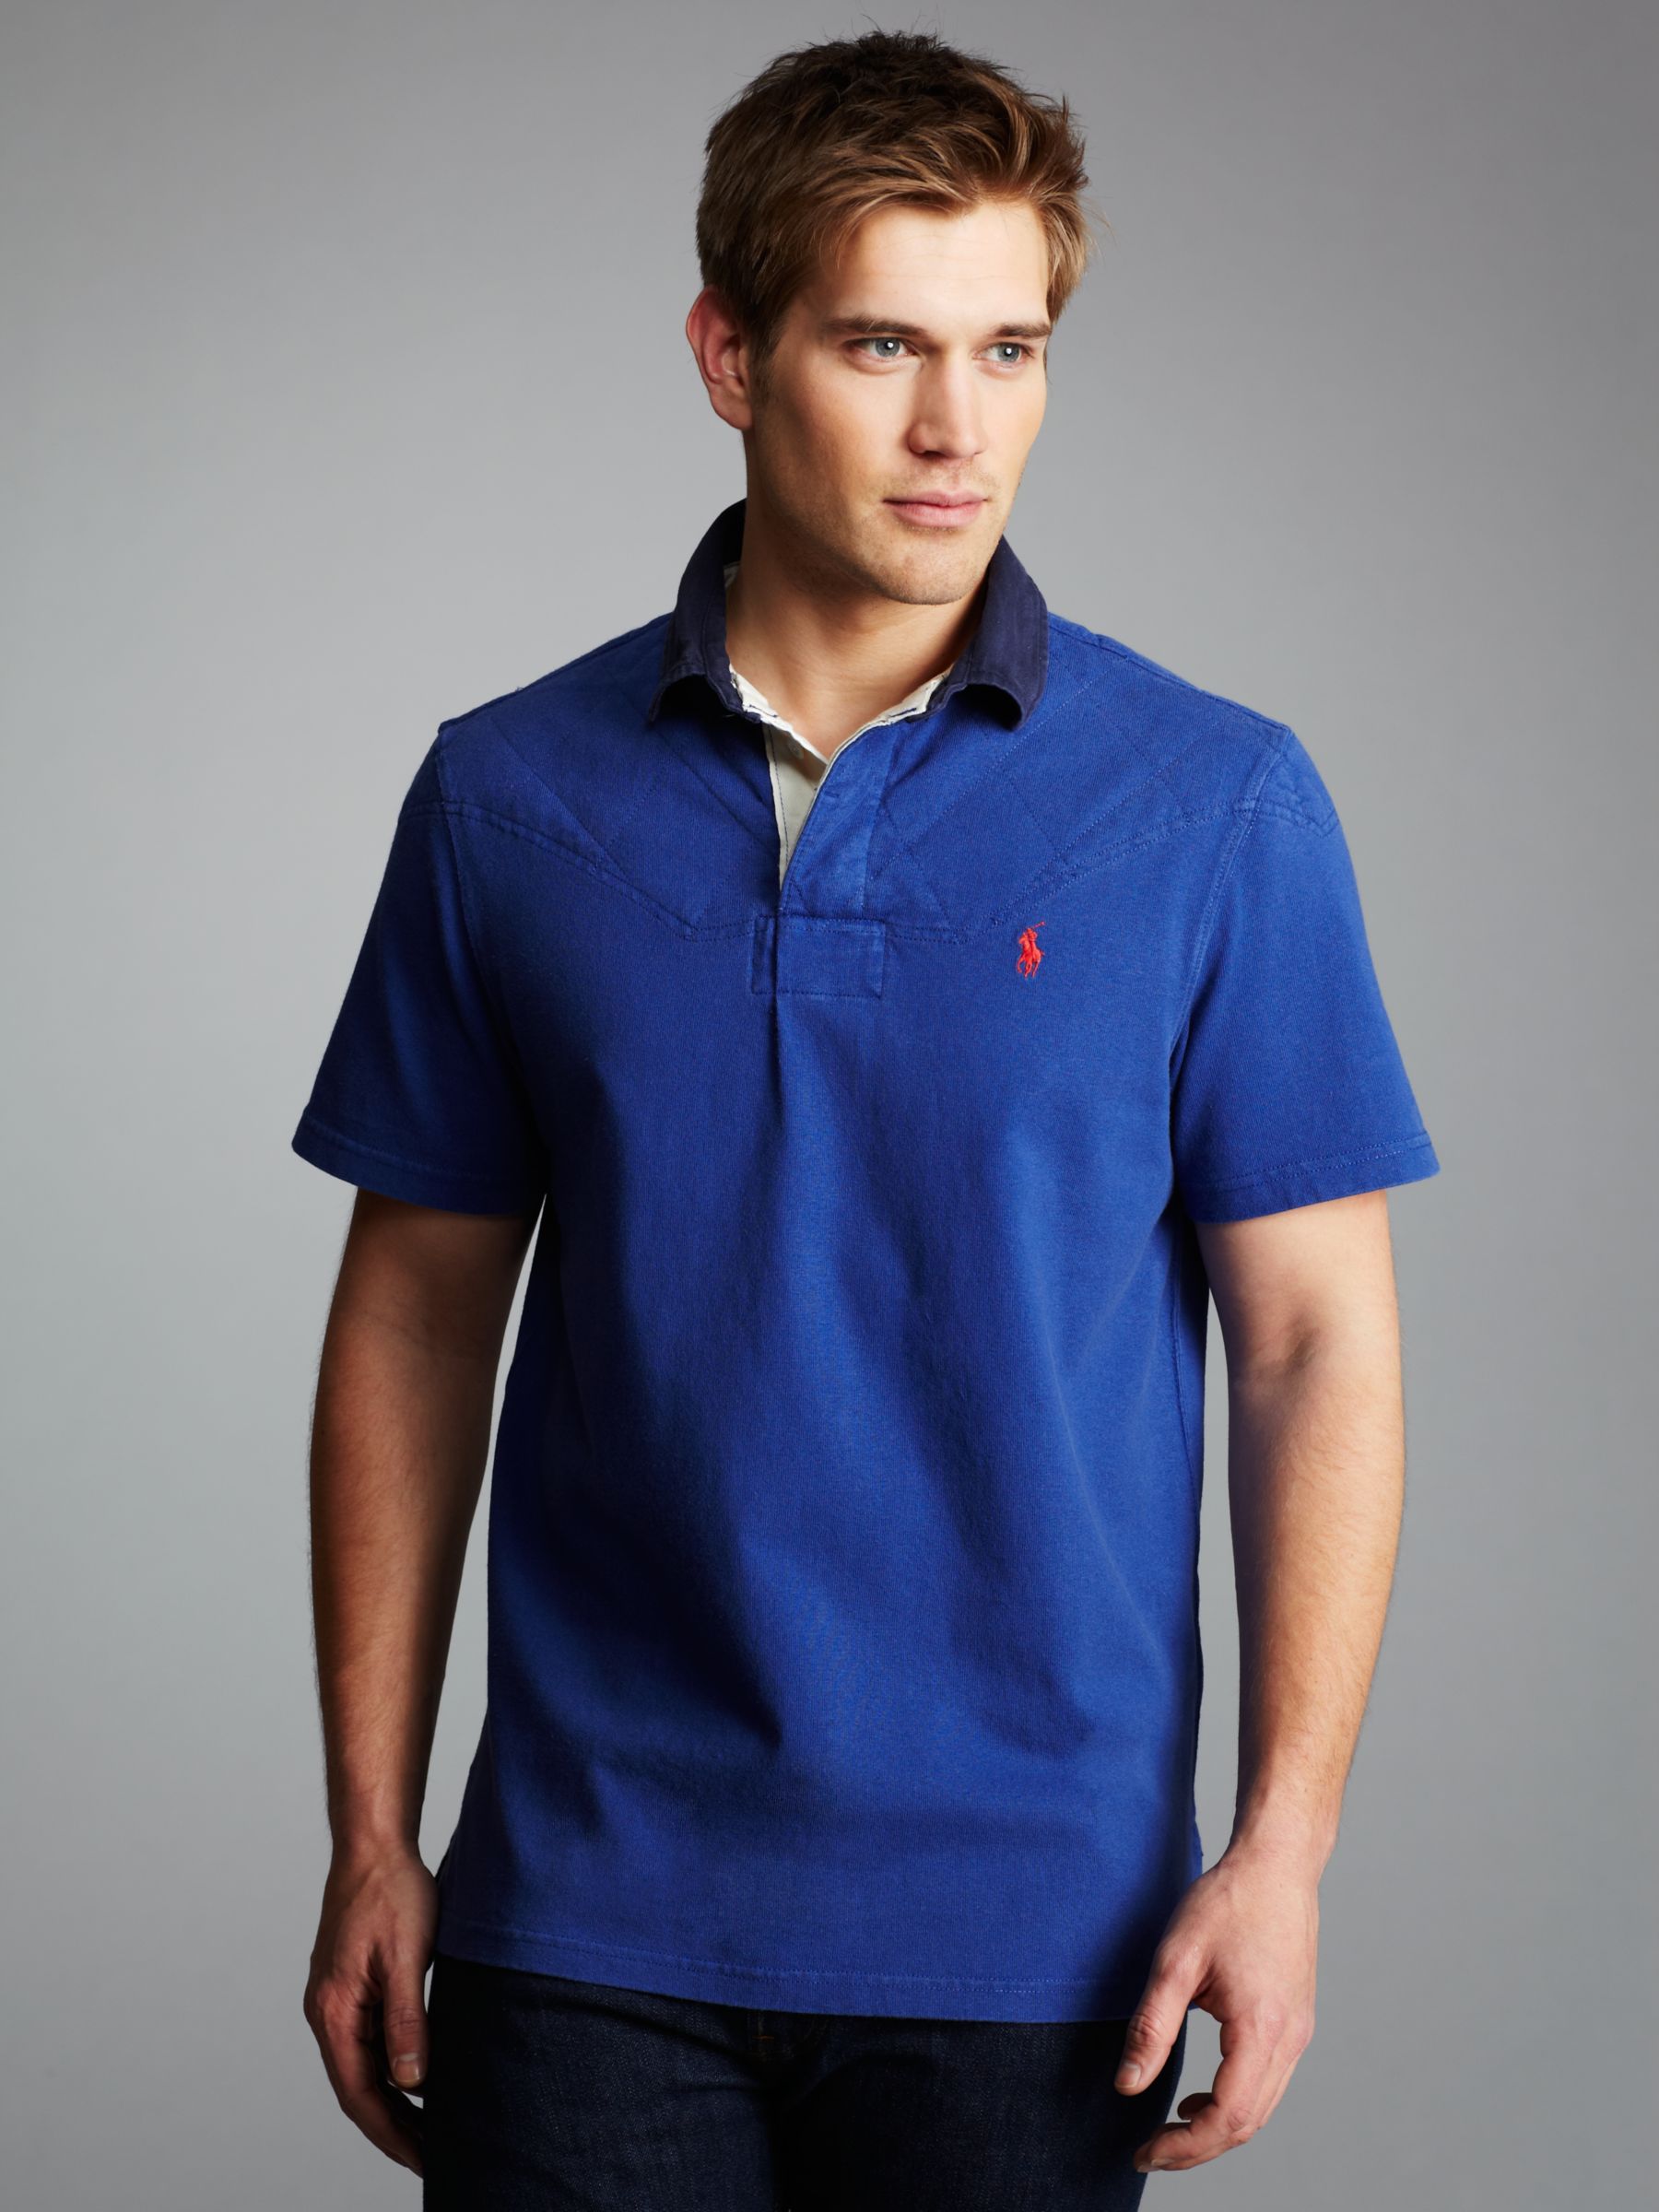 polo ralph lauren rugby shirts